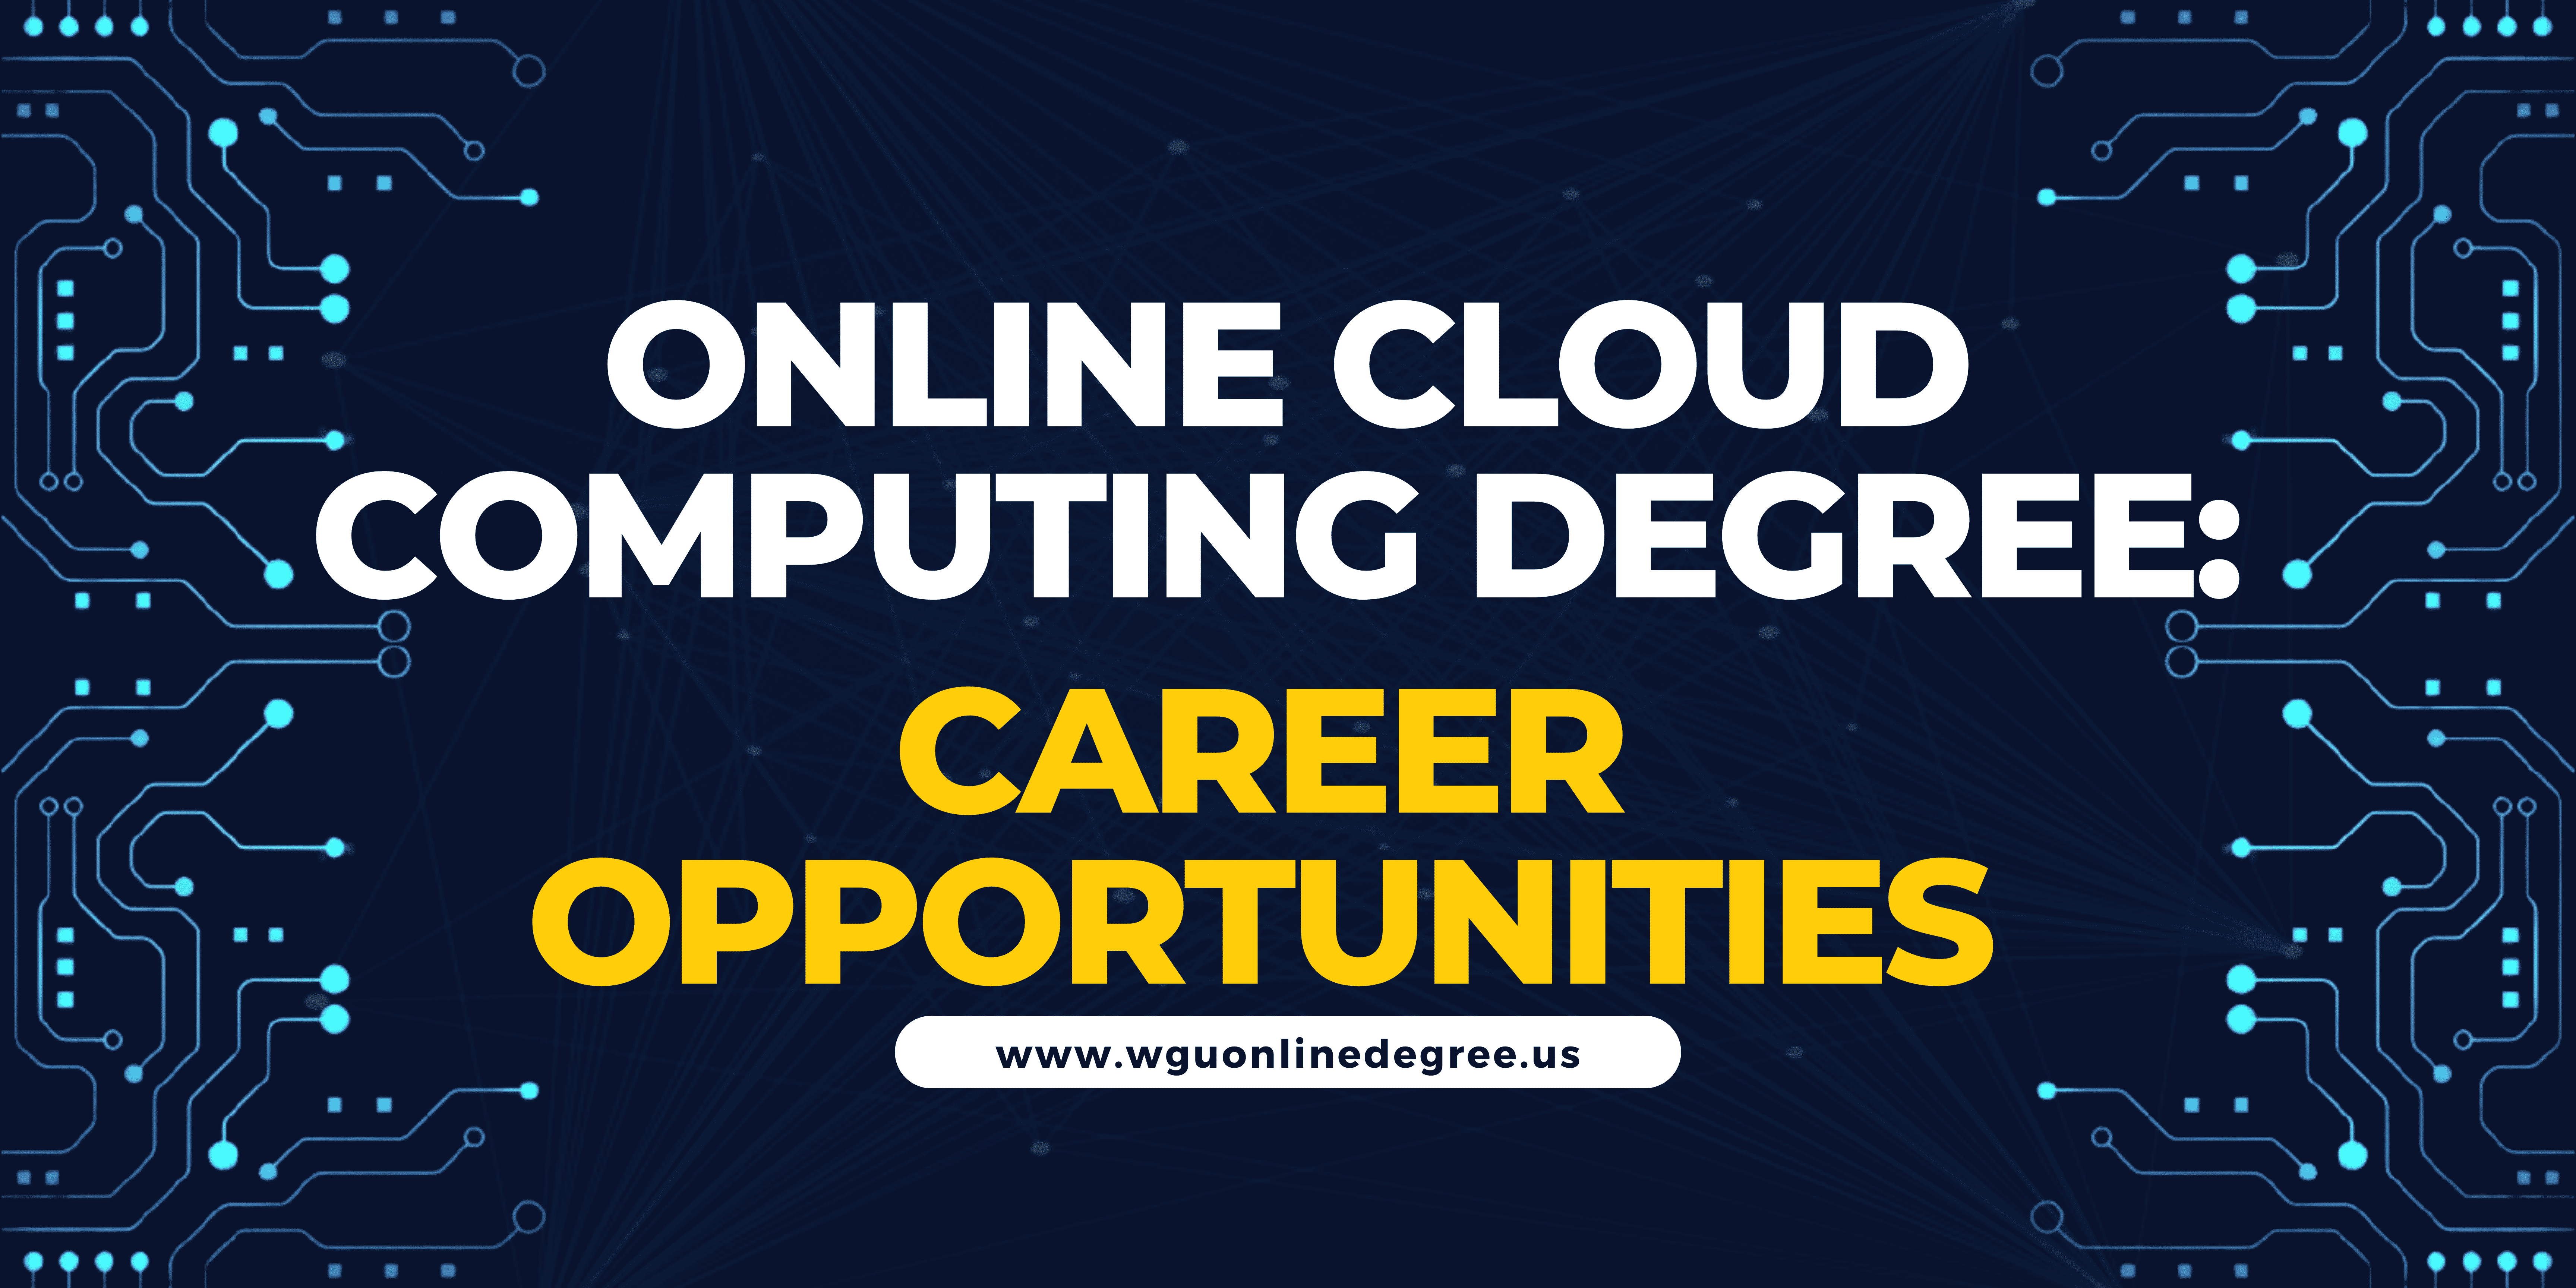 Exploring Career Opportunities with an Online Cloud Computing Degree